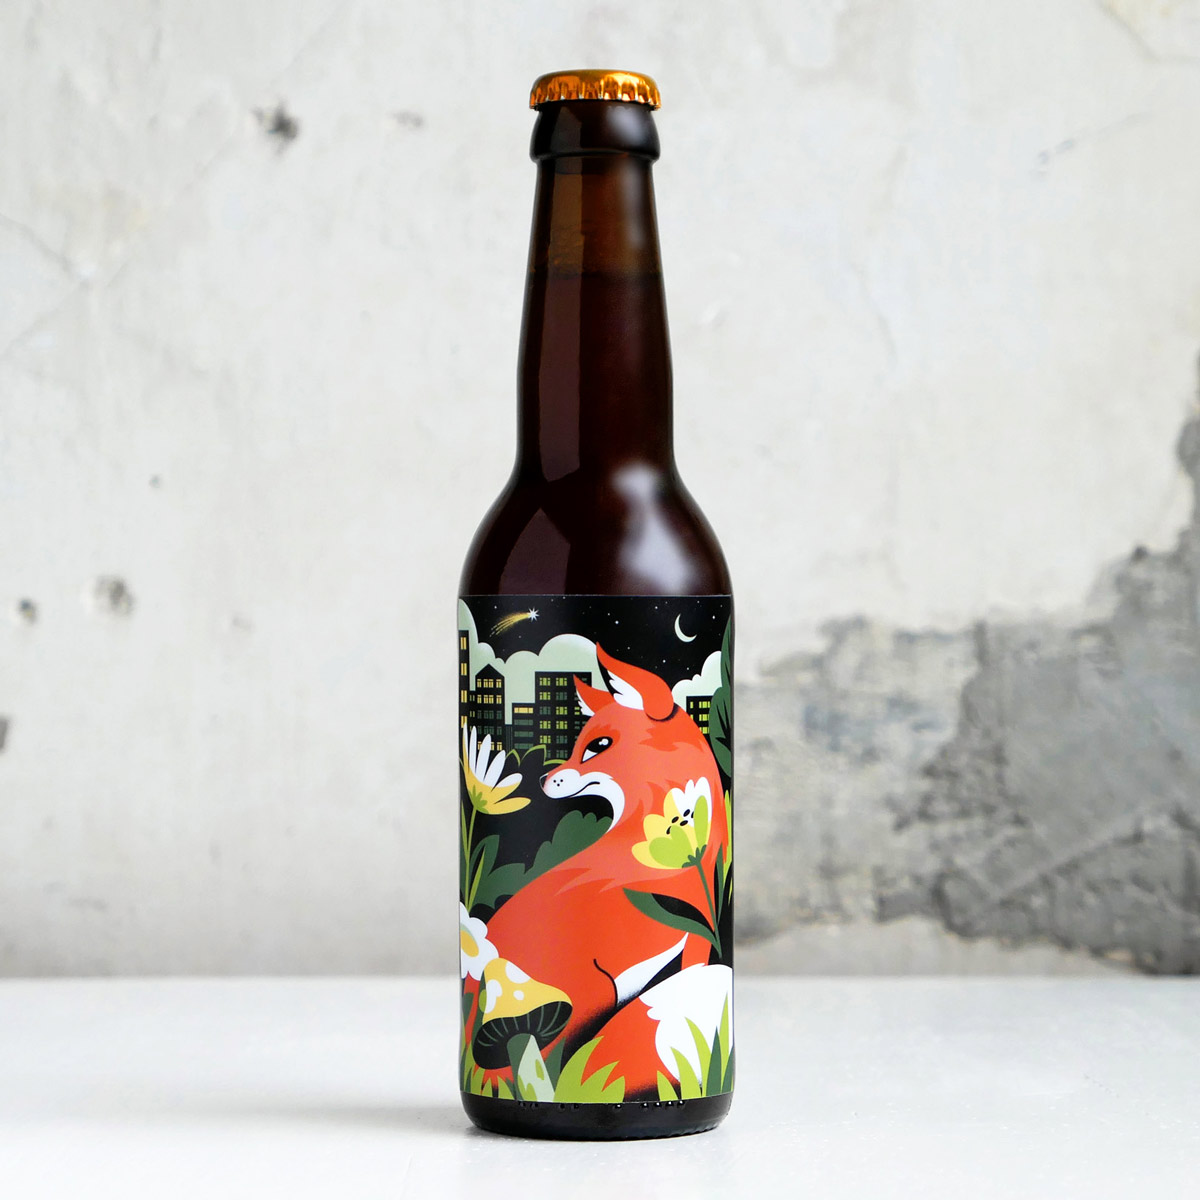 Beer bottle with illustrated beer label, featuring a fox